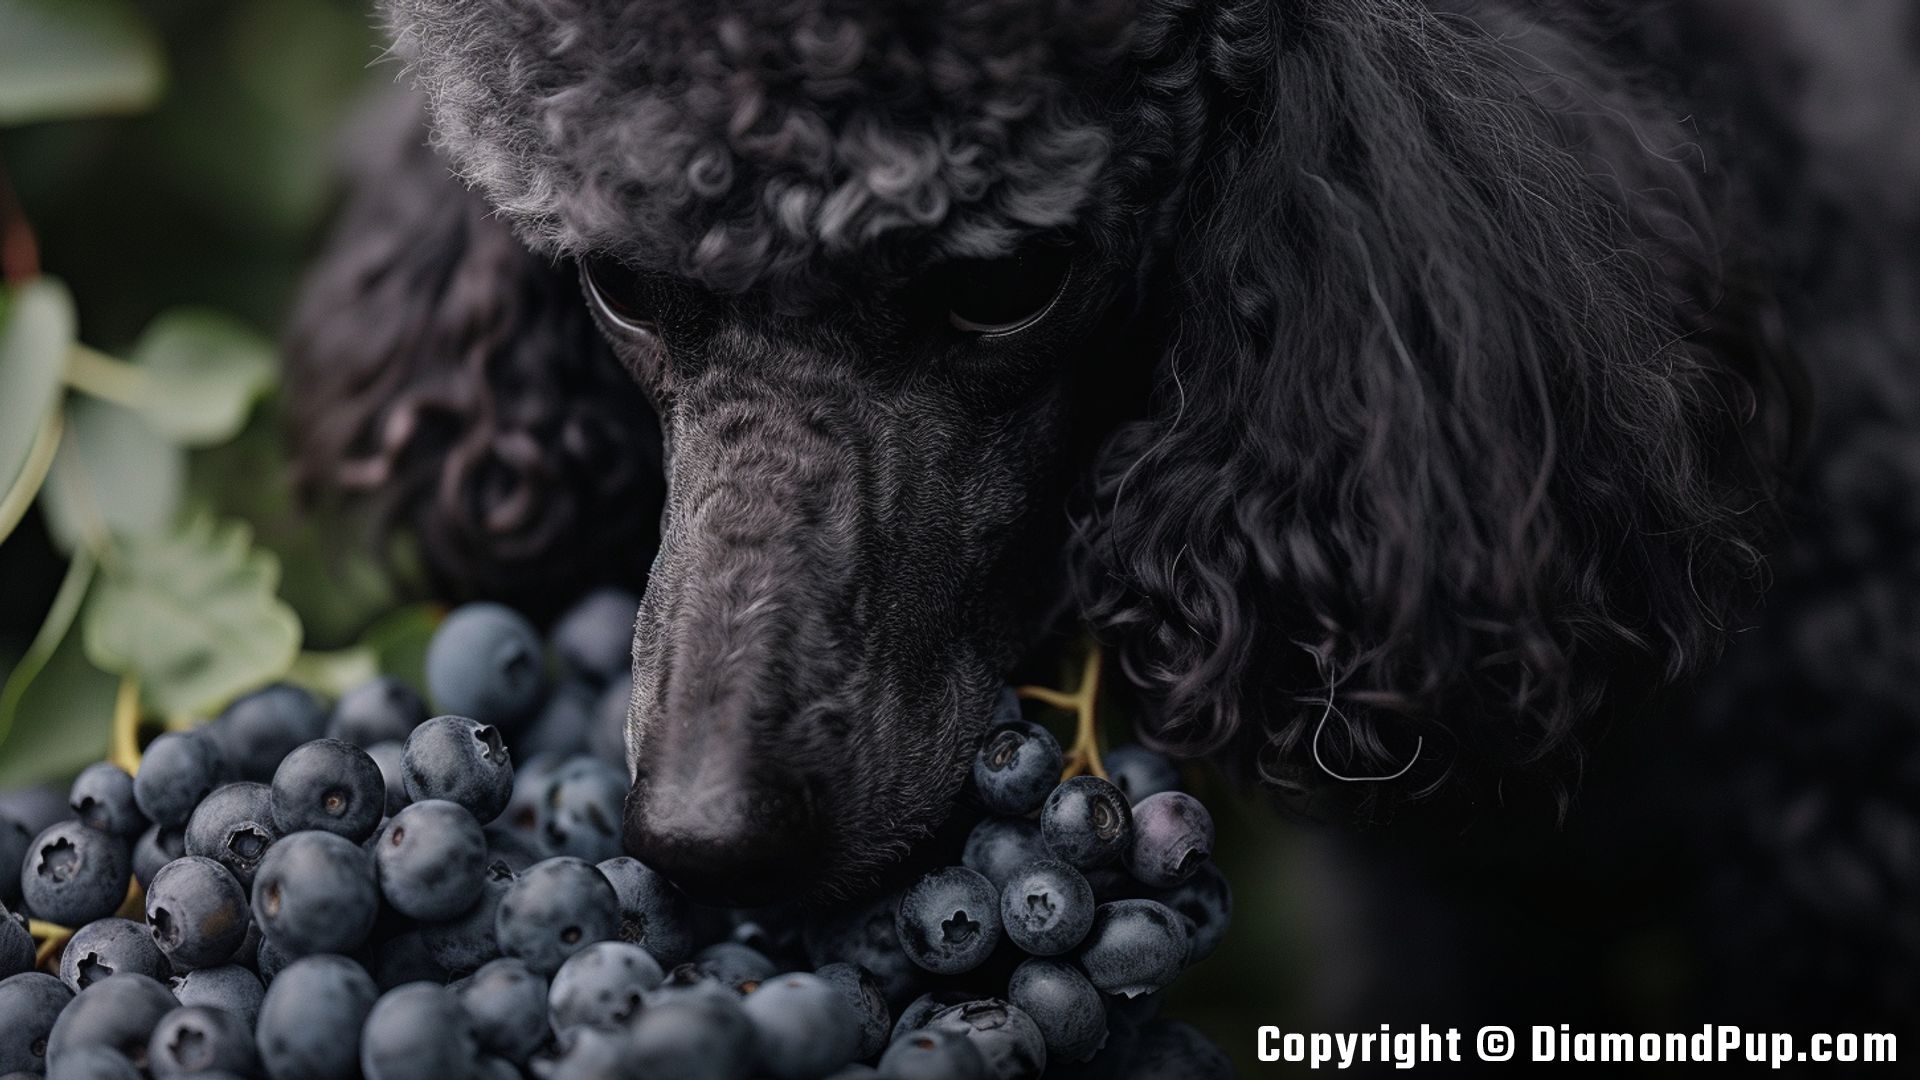 Photograph of Poodle Snacking on Blueberries